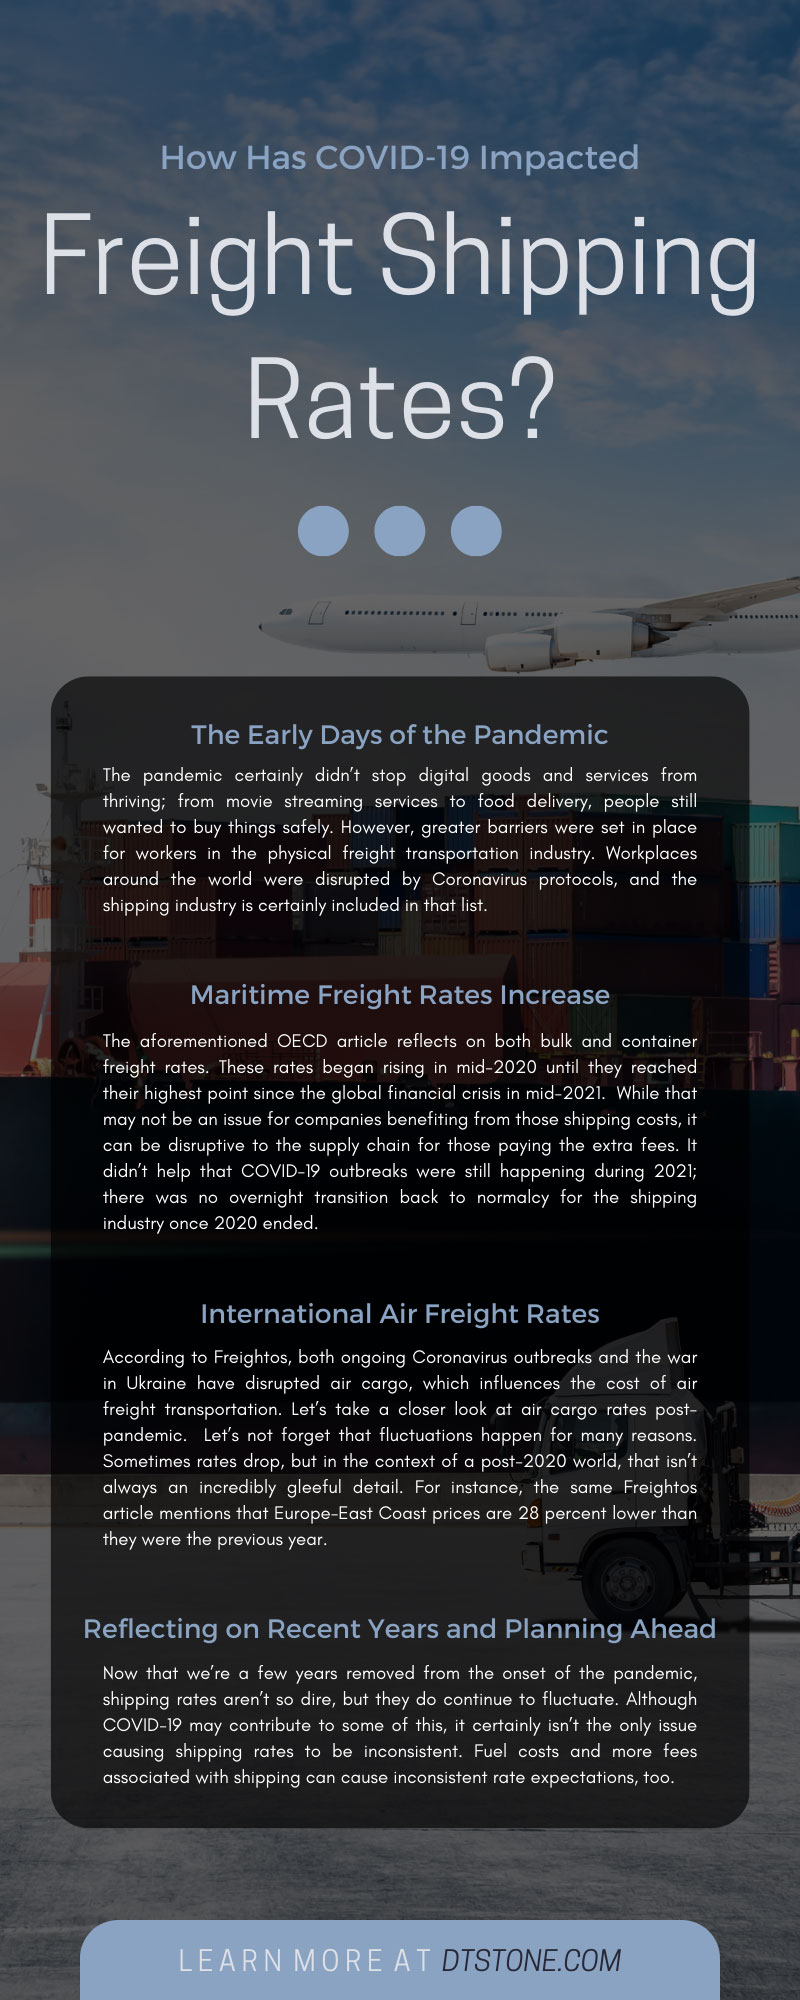 How Has COVID-19 Impacted Freight Shipping Rates?
